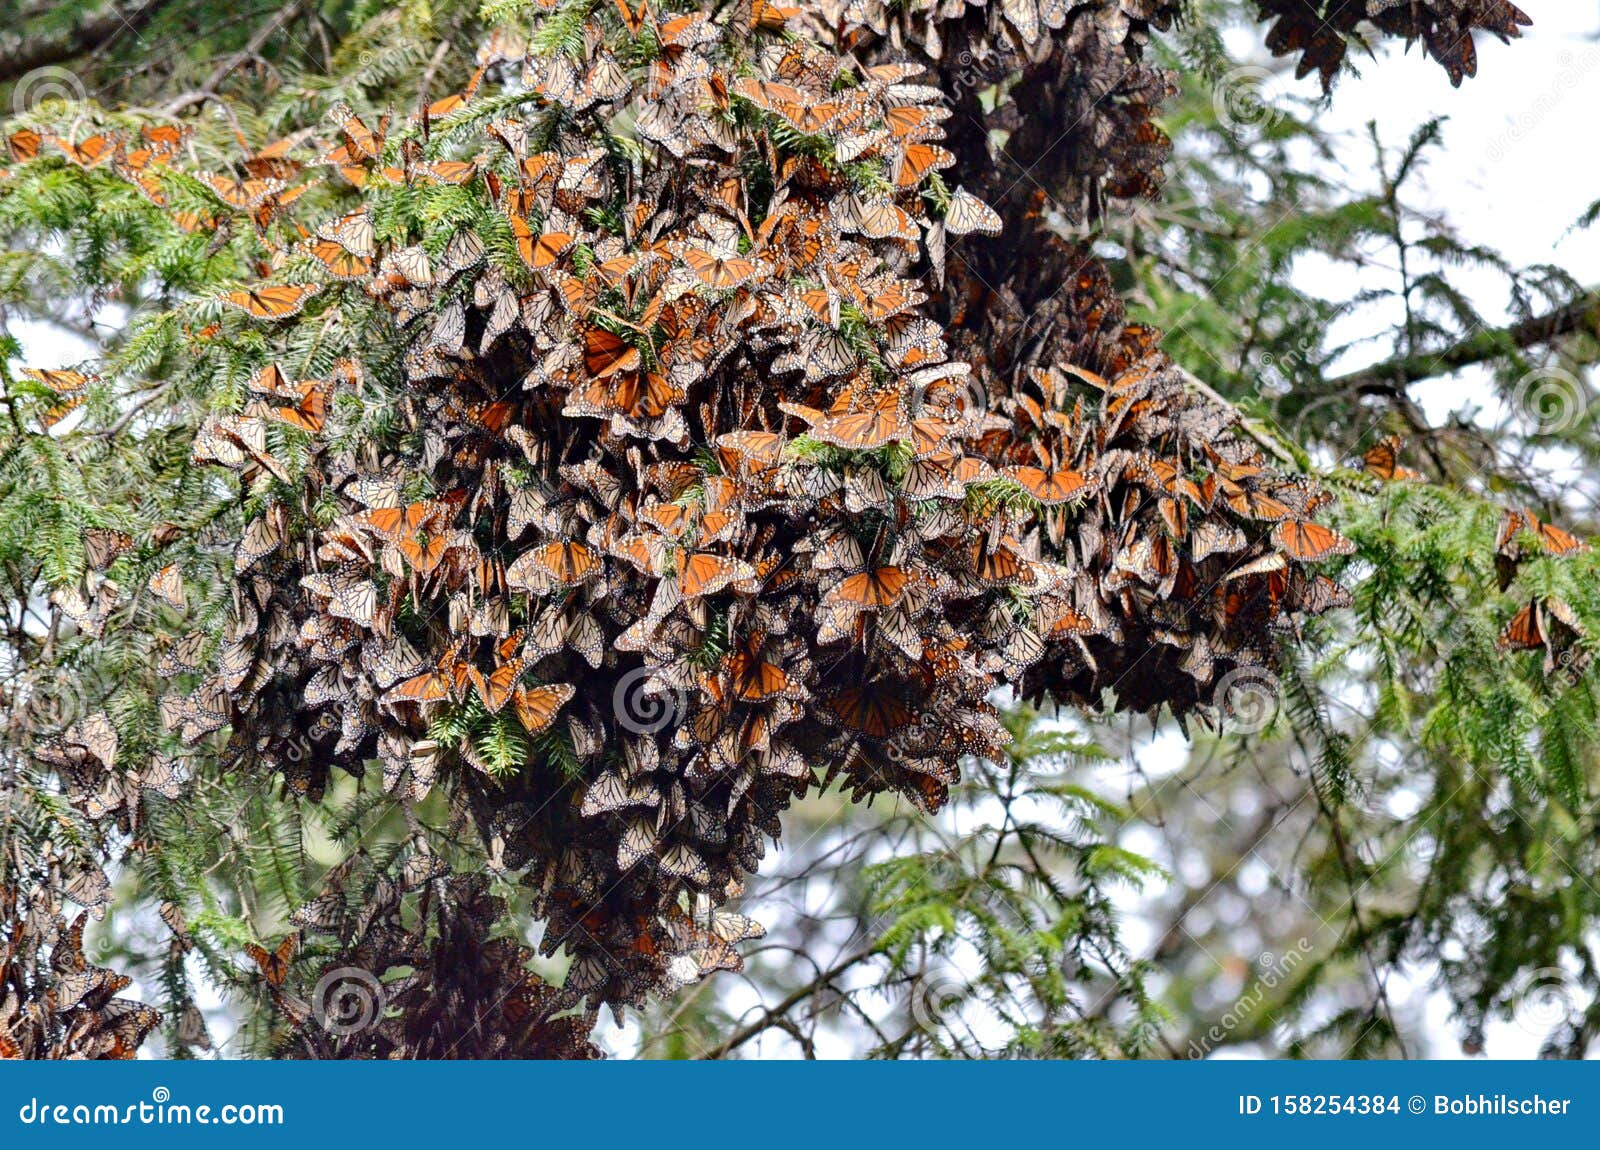 cluster of monarch butterflies on tree limbs at el capulin sanctuary